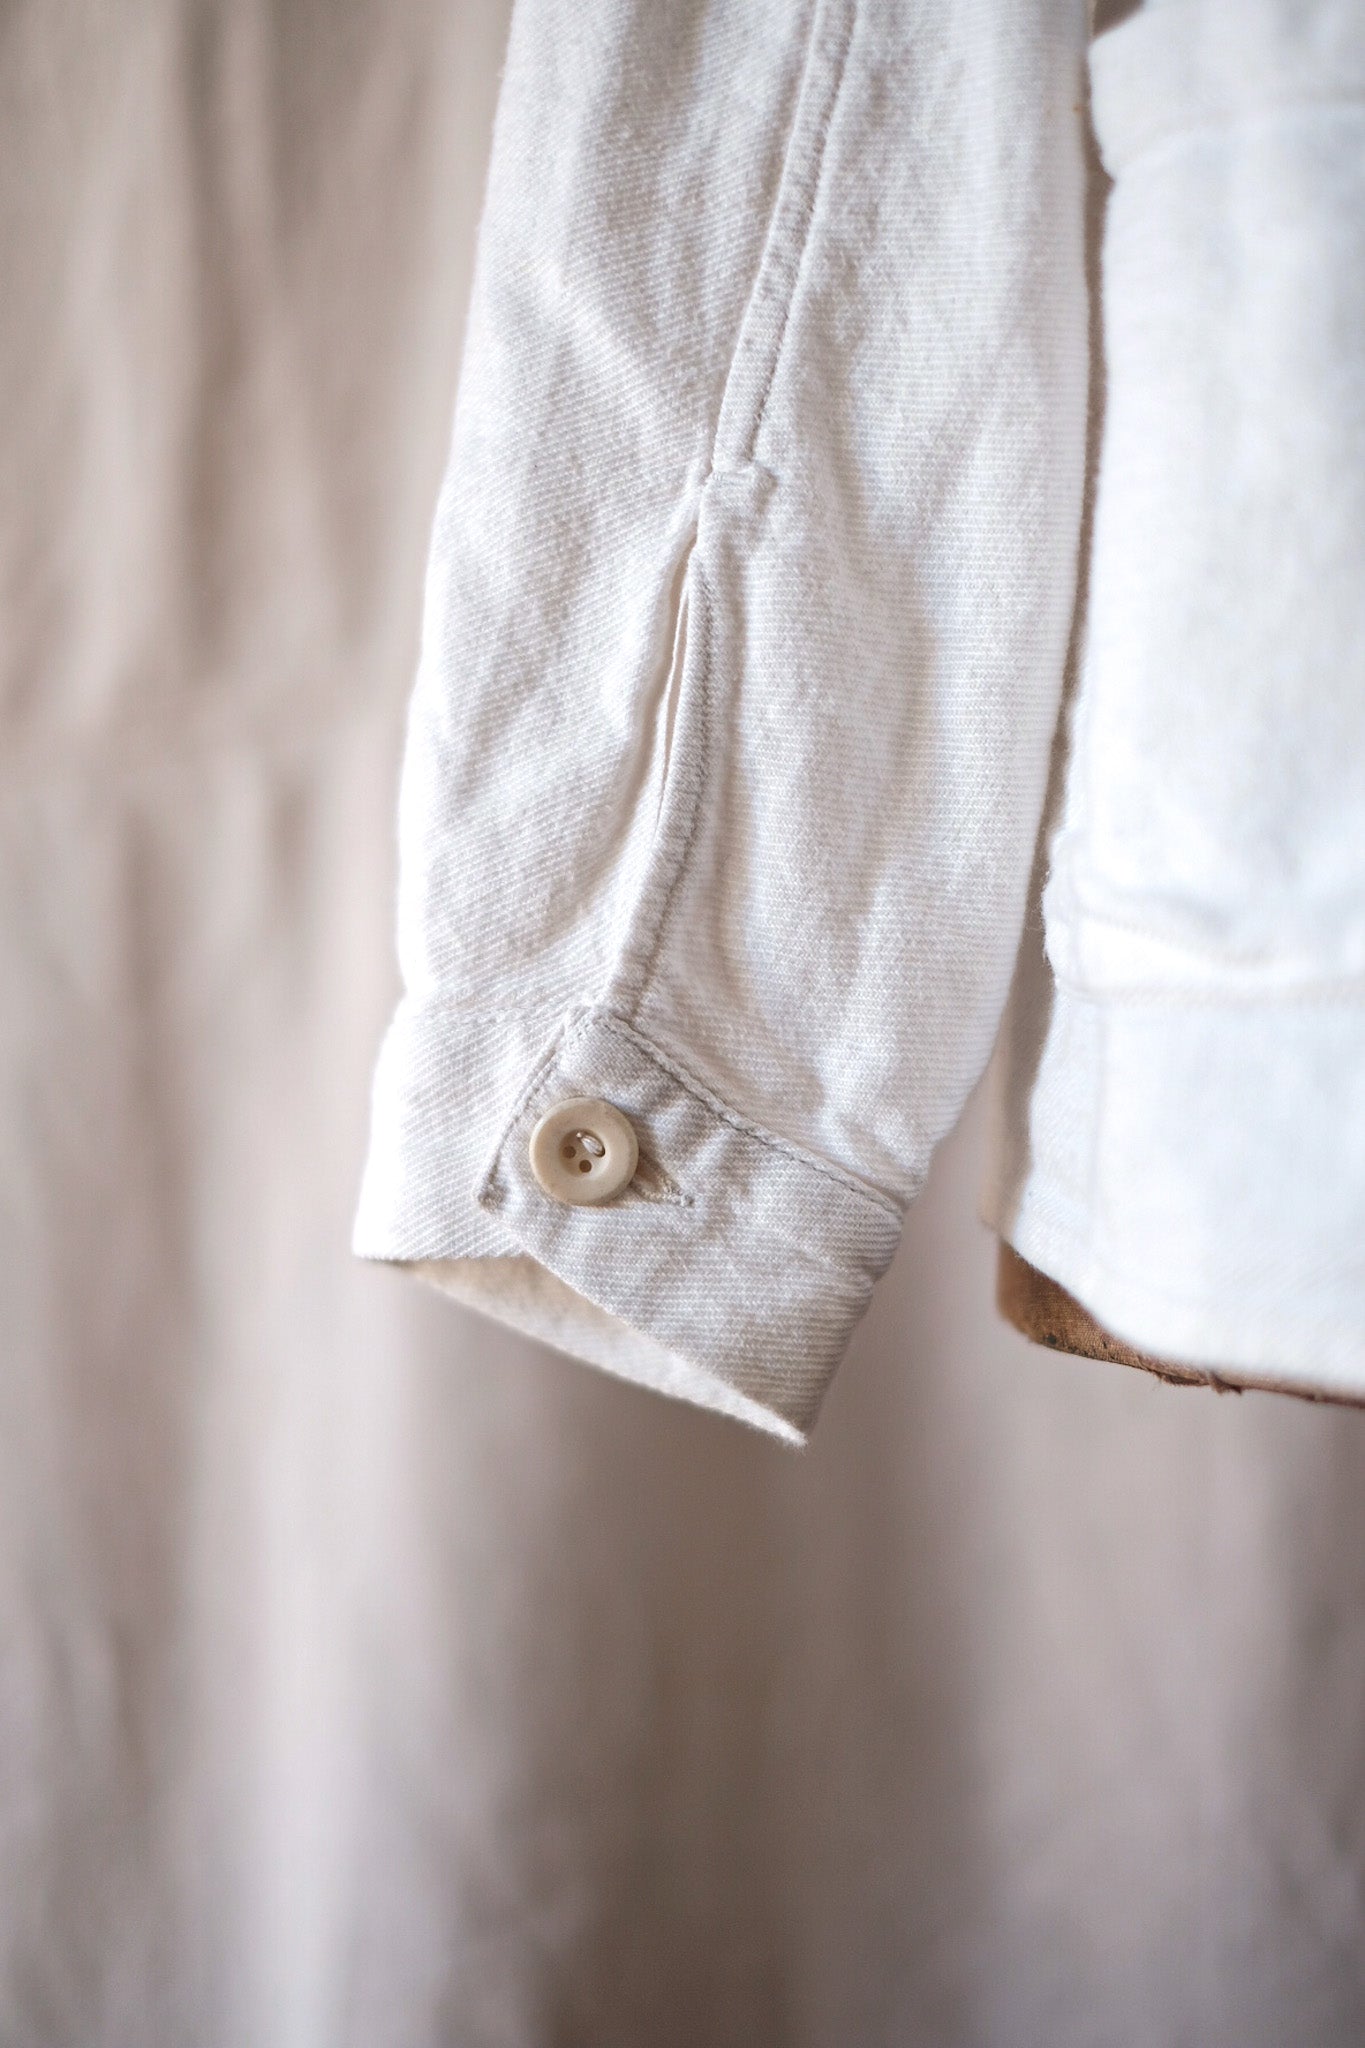 [~ 30's] French Vintage Double Breasted White Cotton Linen Twilk Jacket